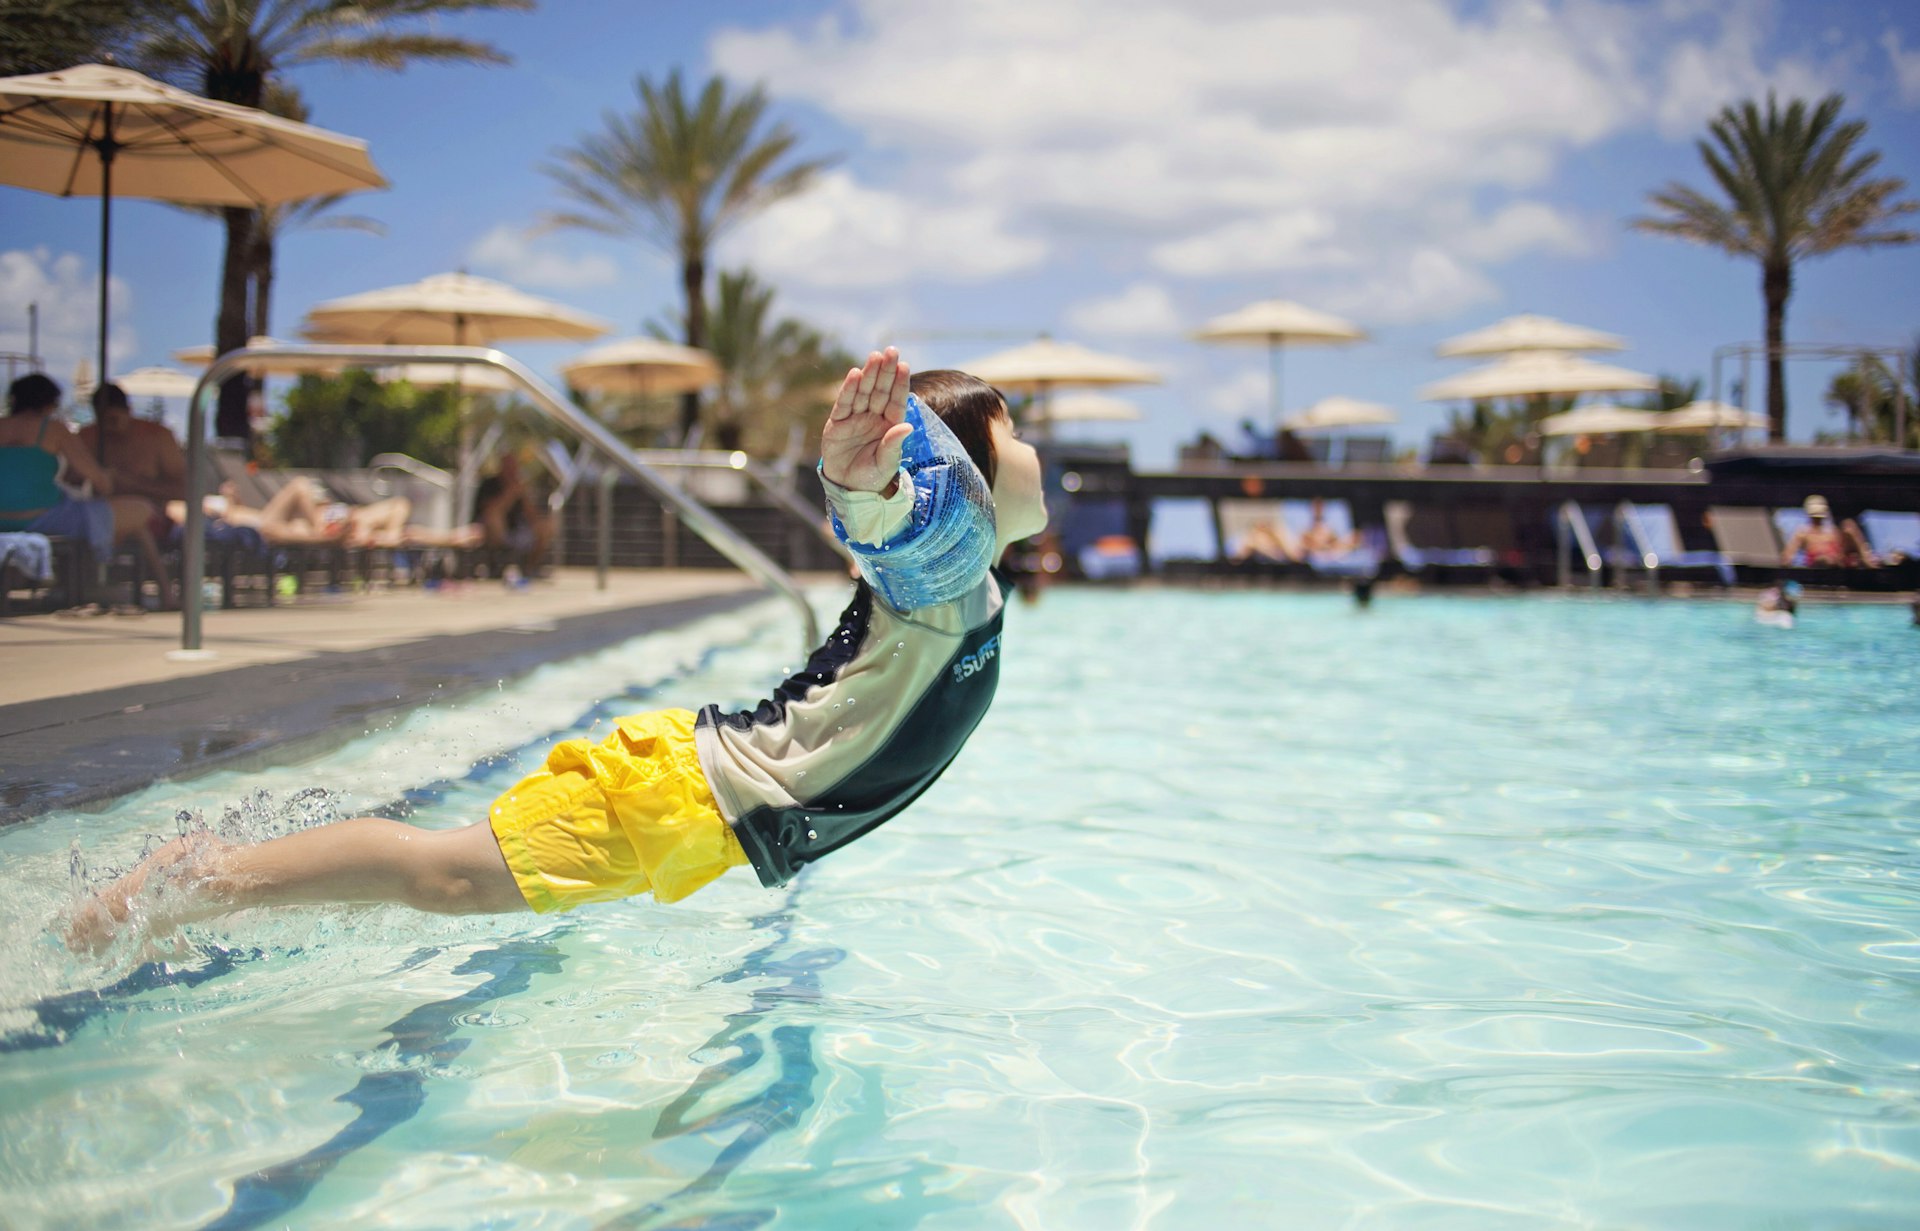 A small boy wearing water wings jumps into a hotel pool that's surrounded by sun loungers